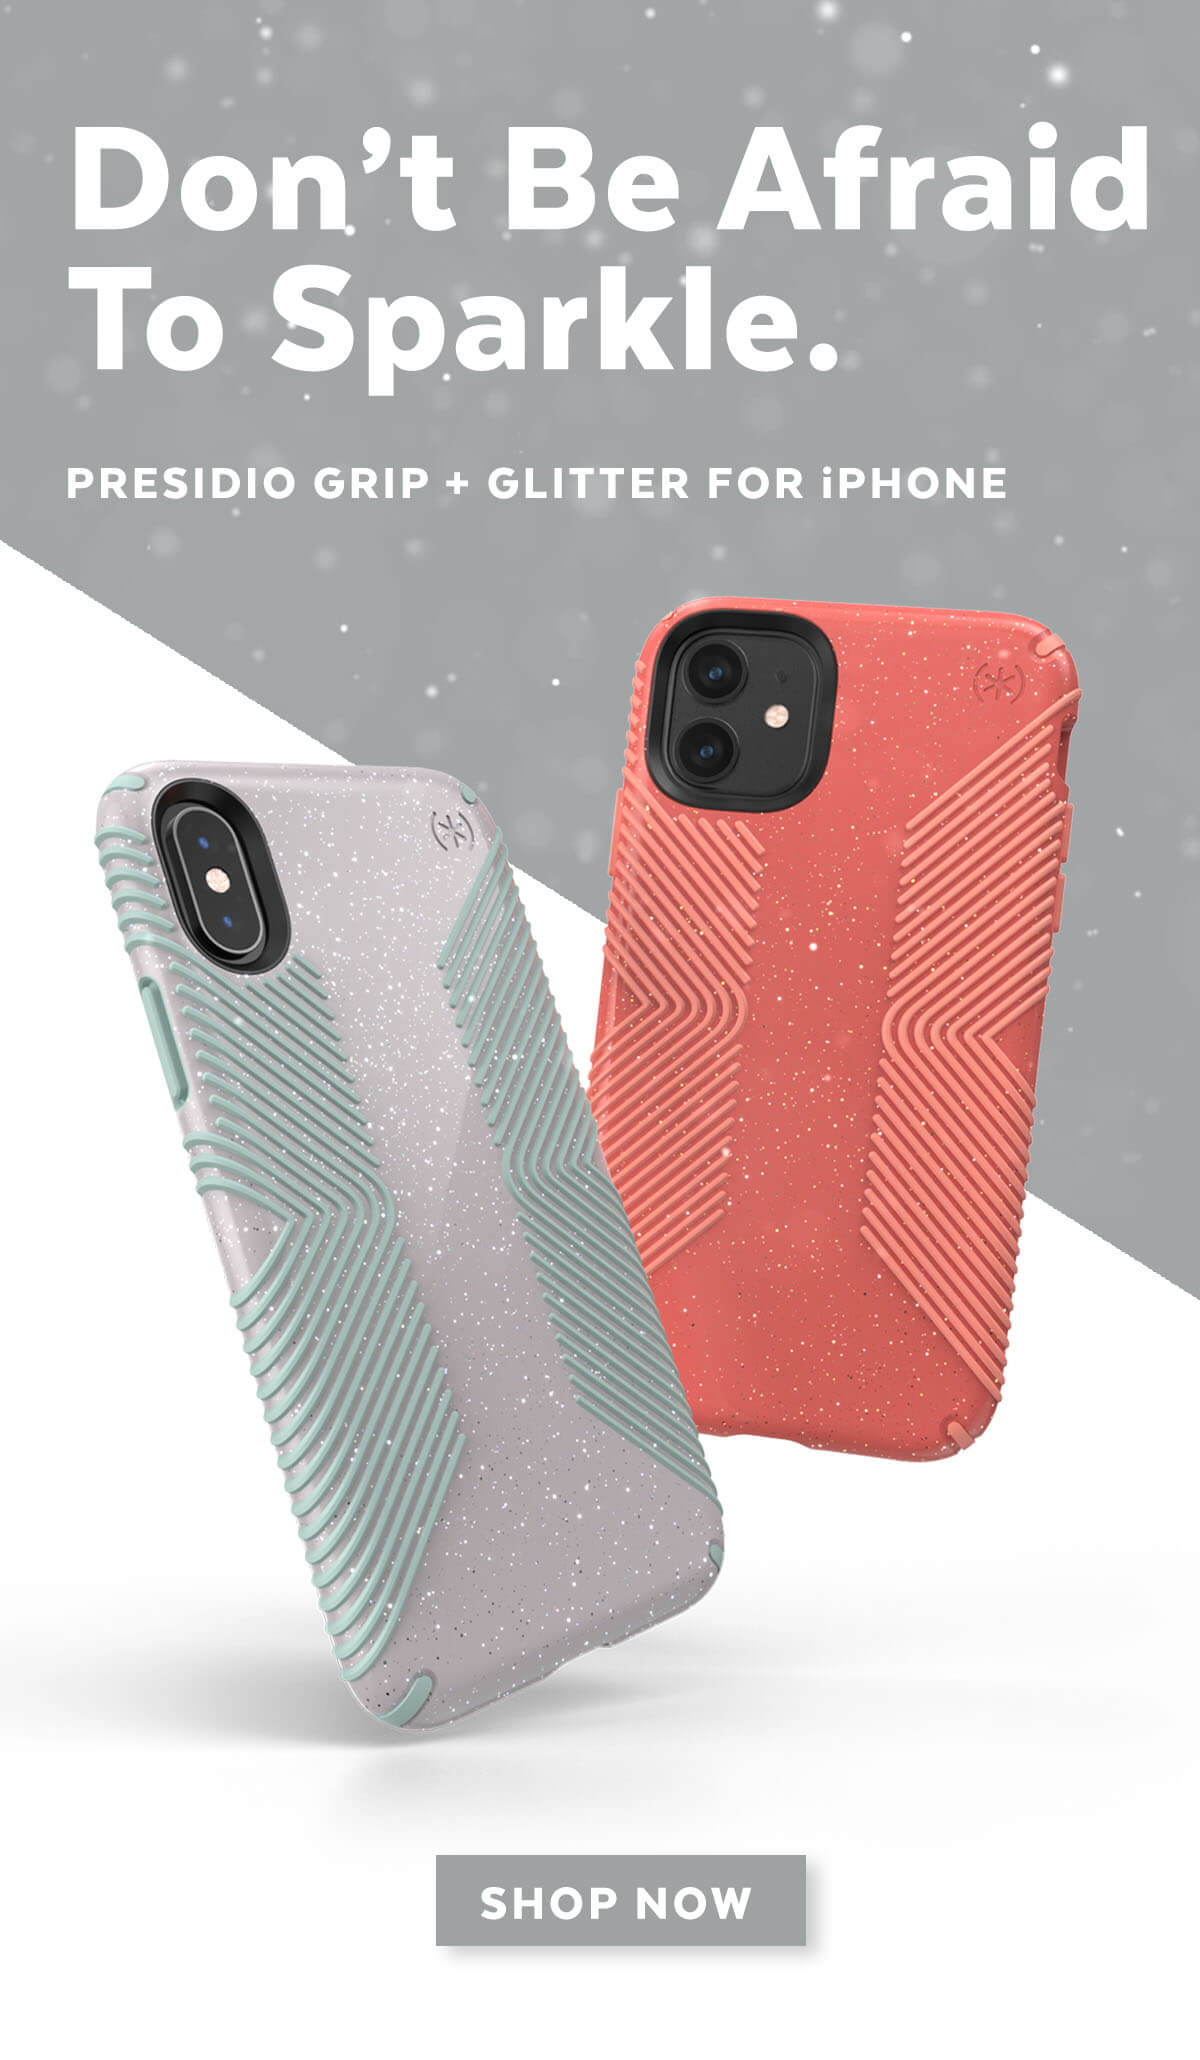 Don't be afraid to sparkle. Presidio Grip + Glitter for iPhone. Shop now!